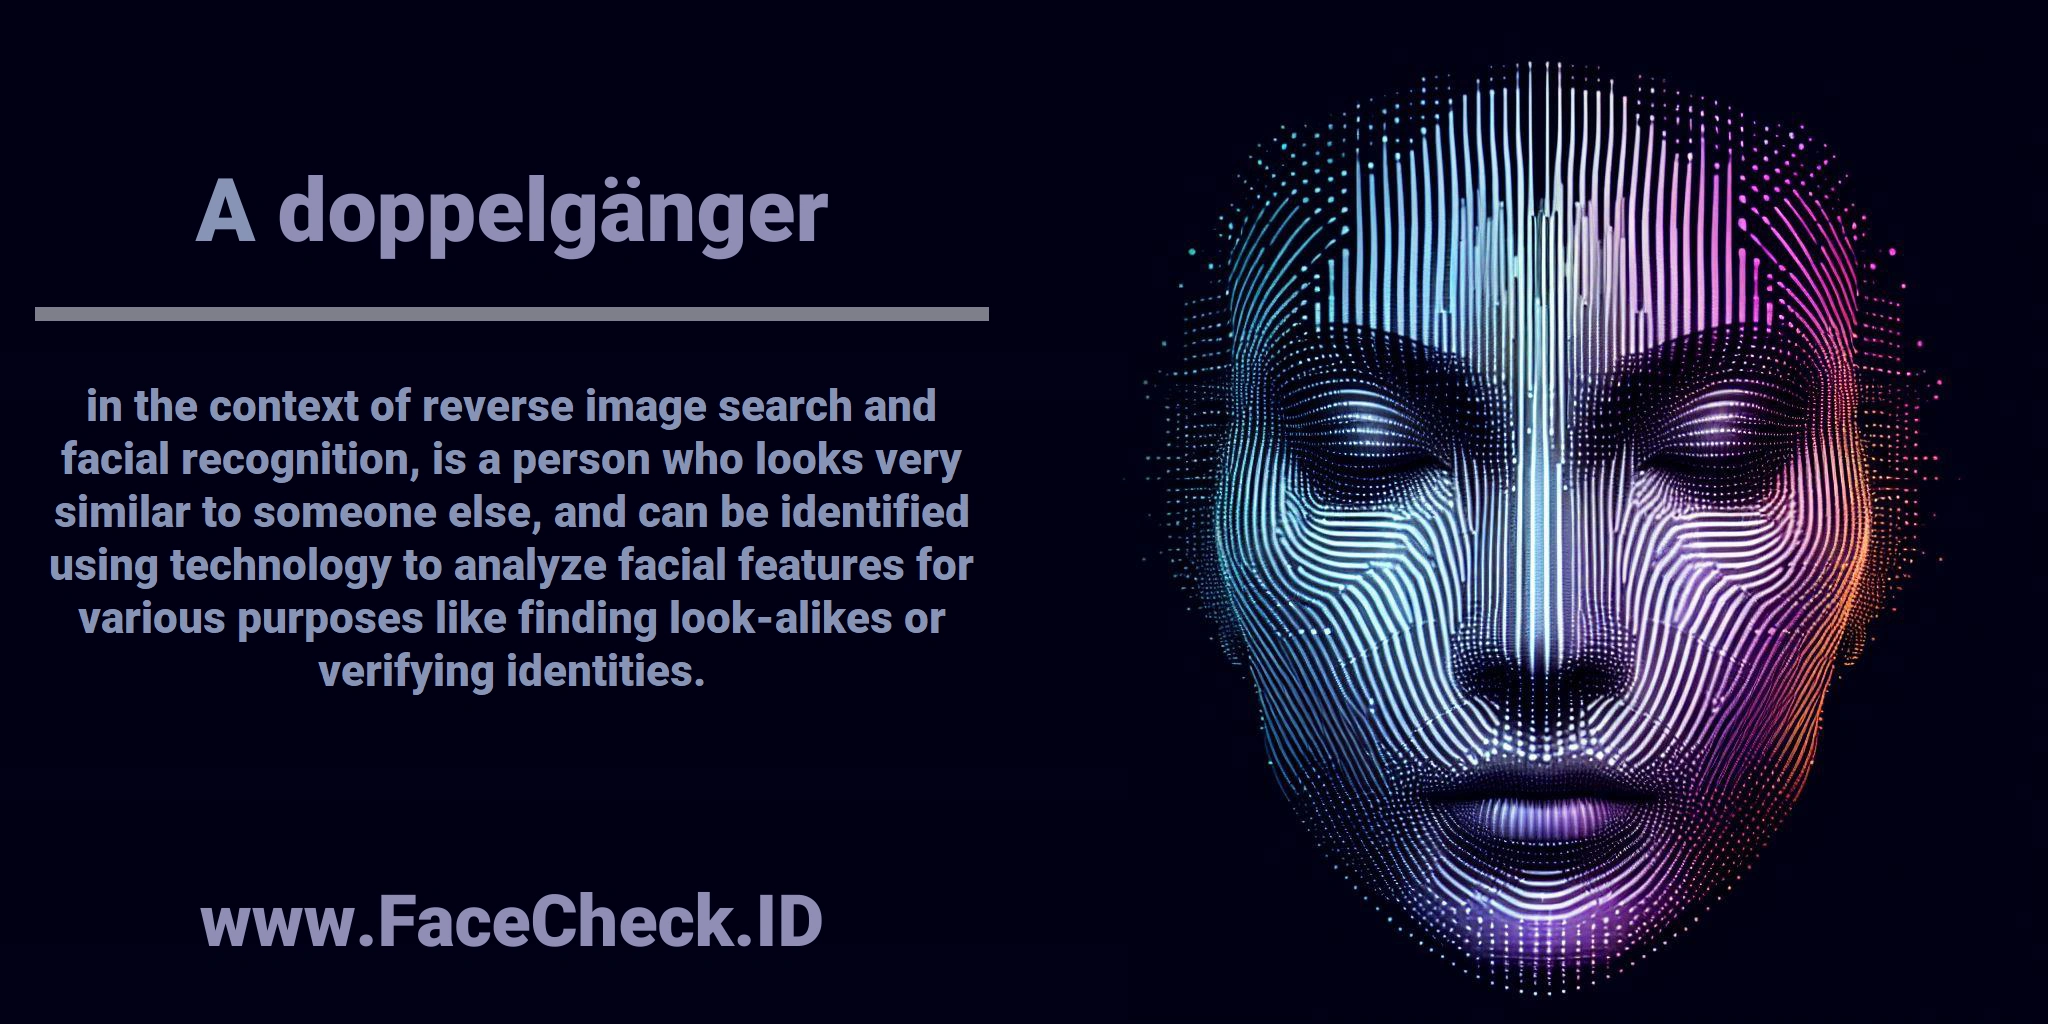 A <b>doppelgänger</b> in the context of reverse image search and facial recognition, is a person who looks very similar to someone else, and can be identified using technology to analyze facial features for various purposes like finding look-alikes or verifying identities.